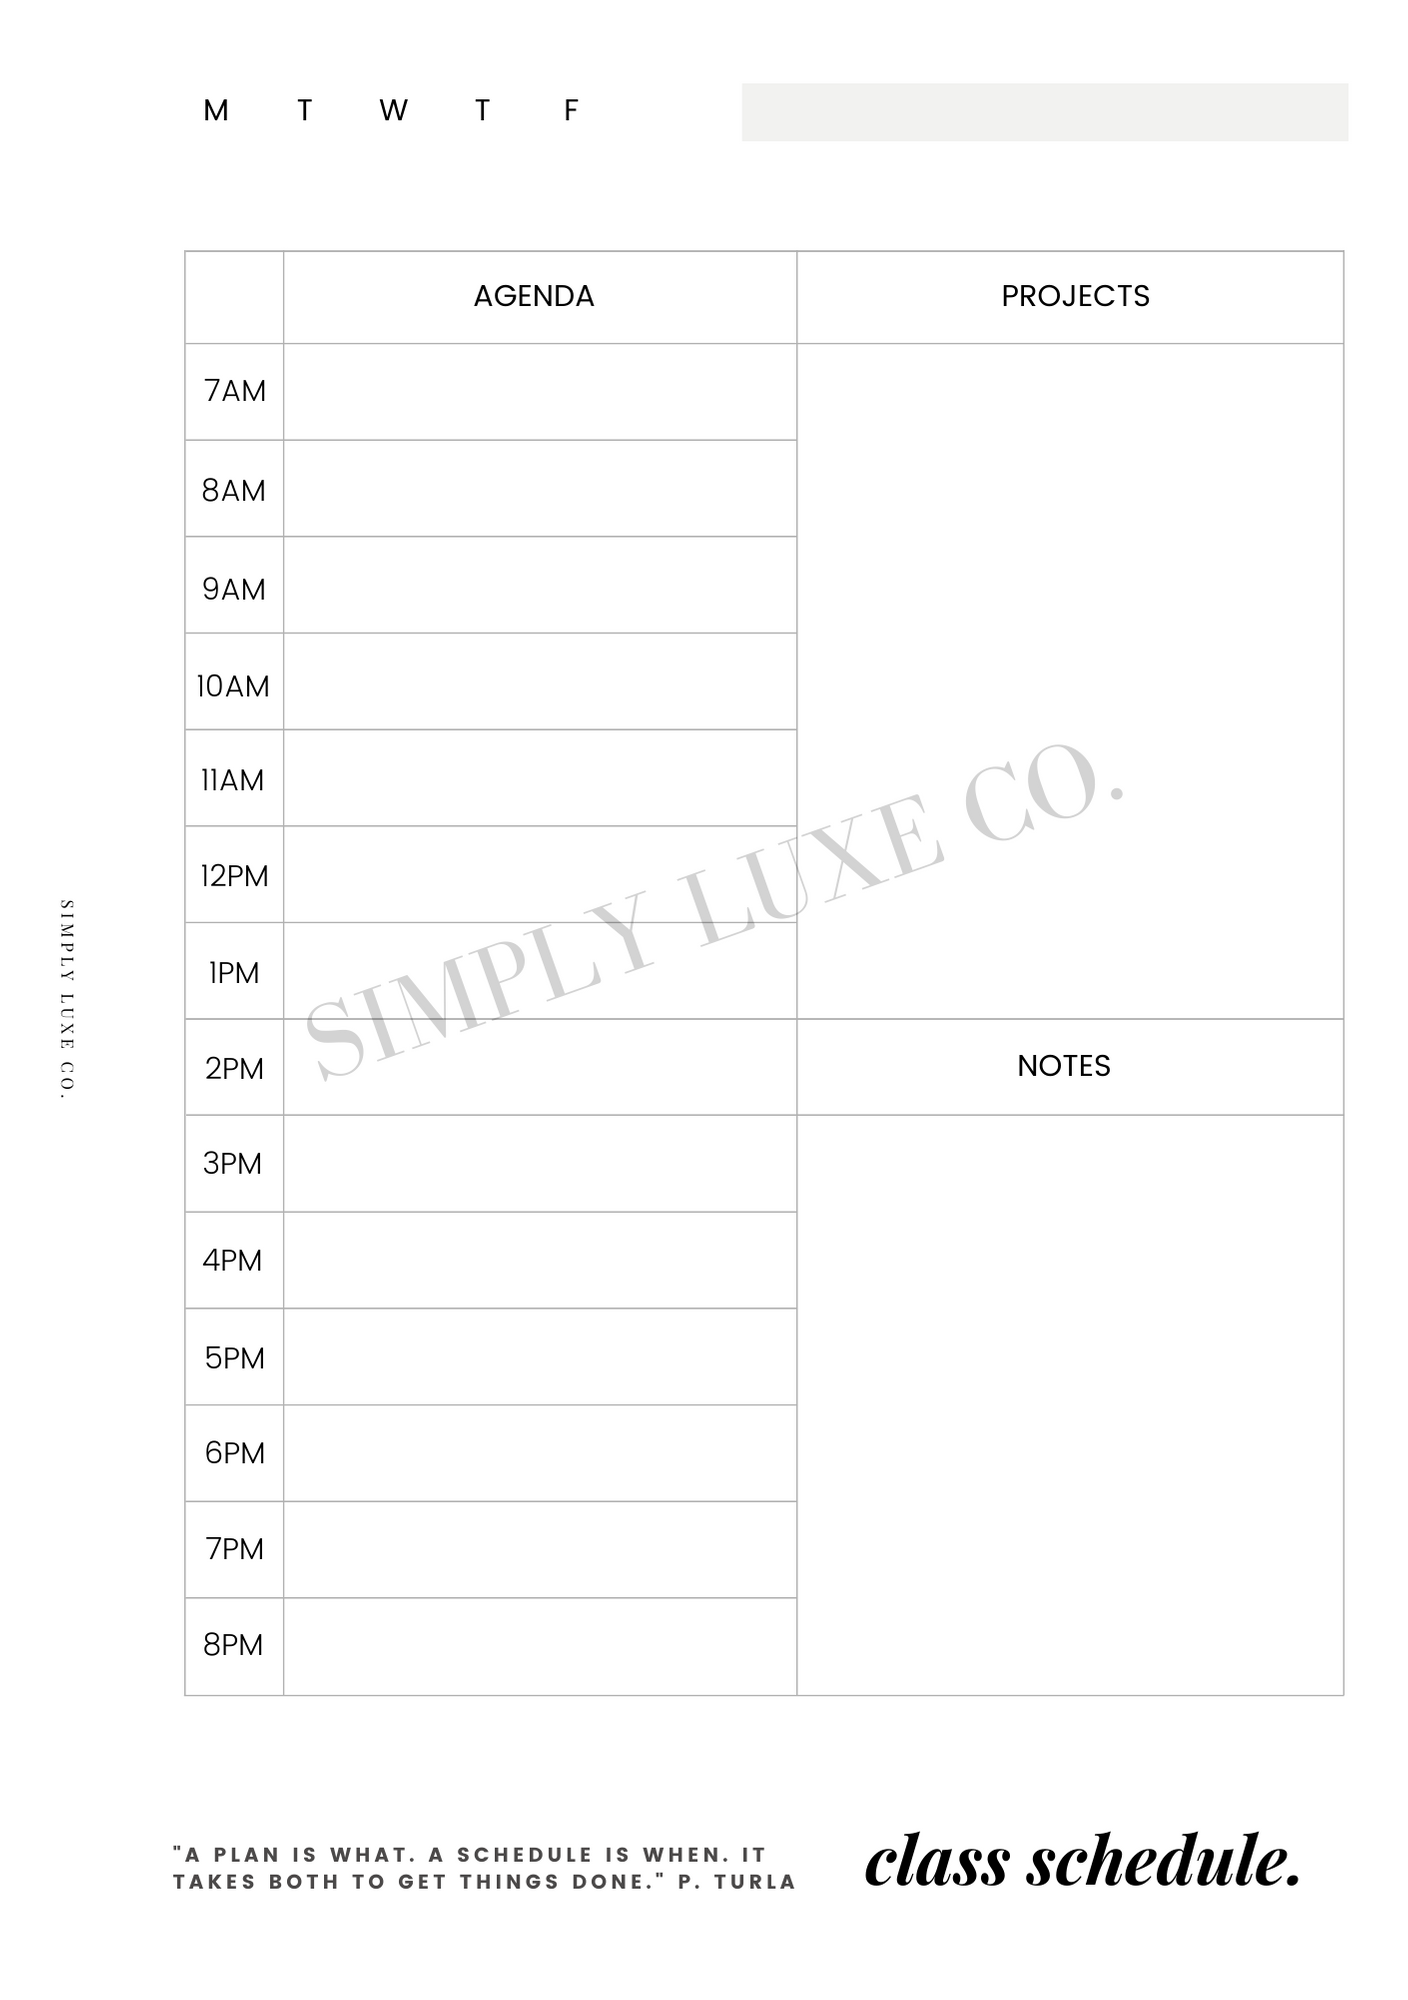 class schedule "Editorial Edition" Printable Insert